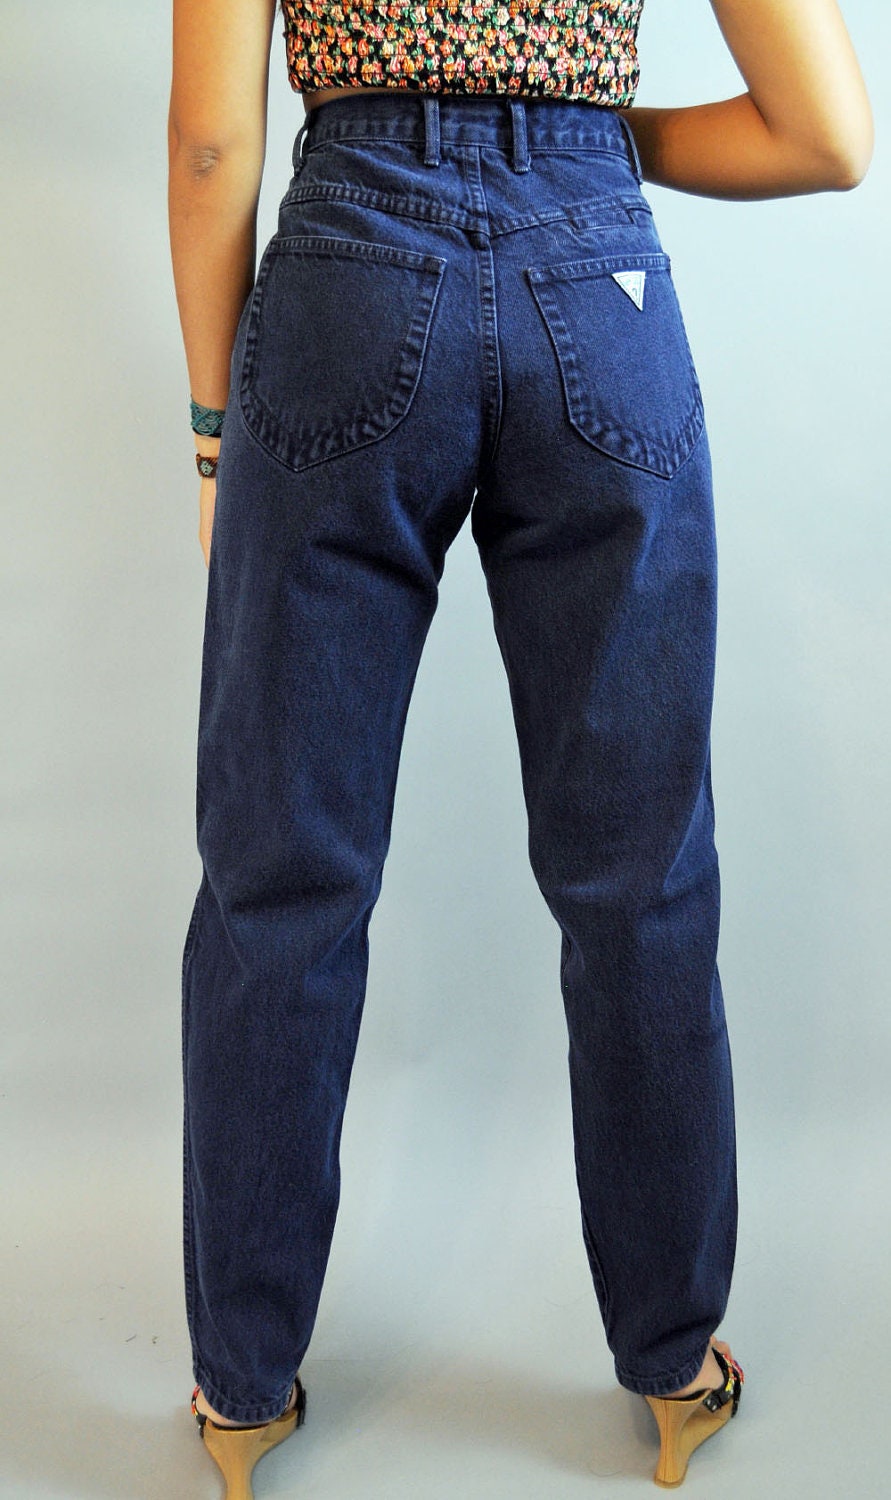 Vintage 80s HIGH waisted JEANS / Womens Guess Indigo wash